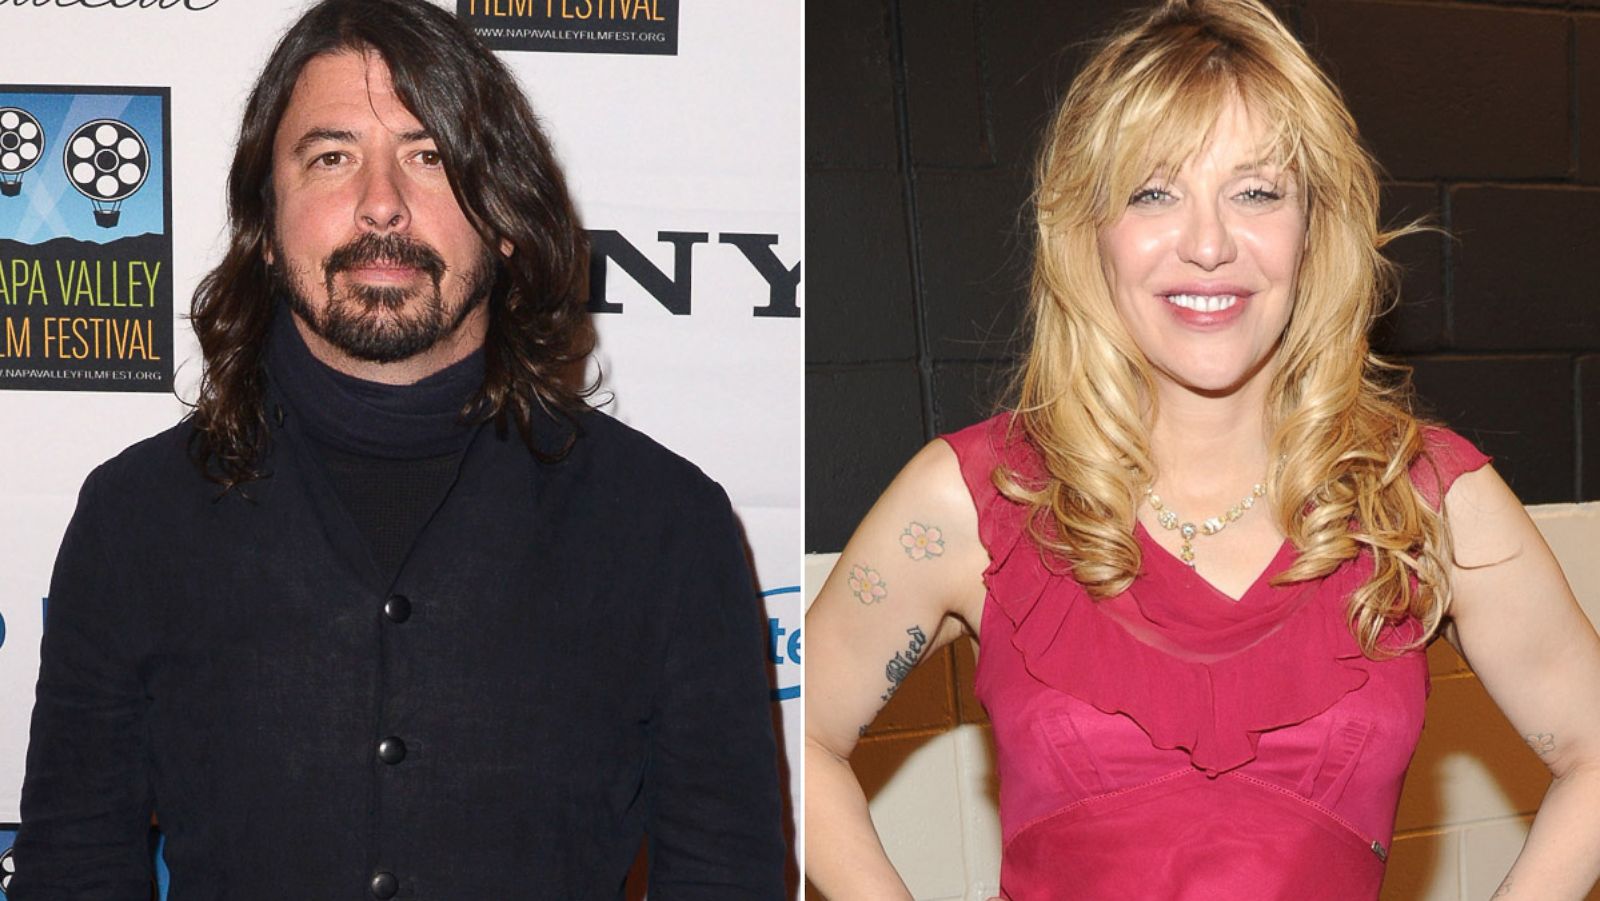 Dave Grohl, Krist Novoselic Have Recorded New Music